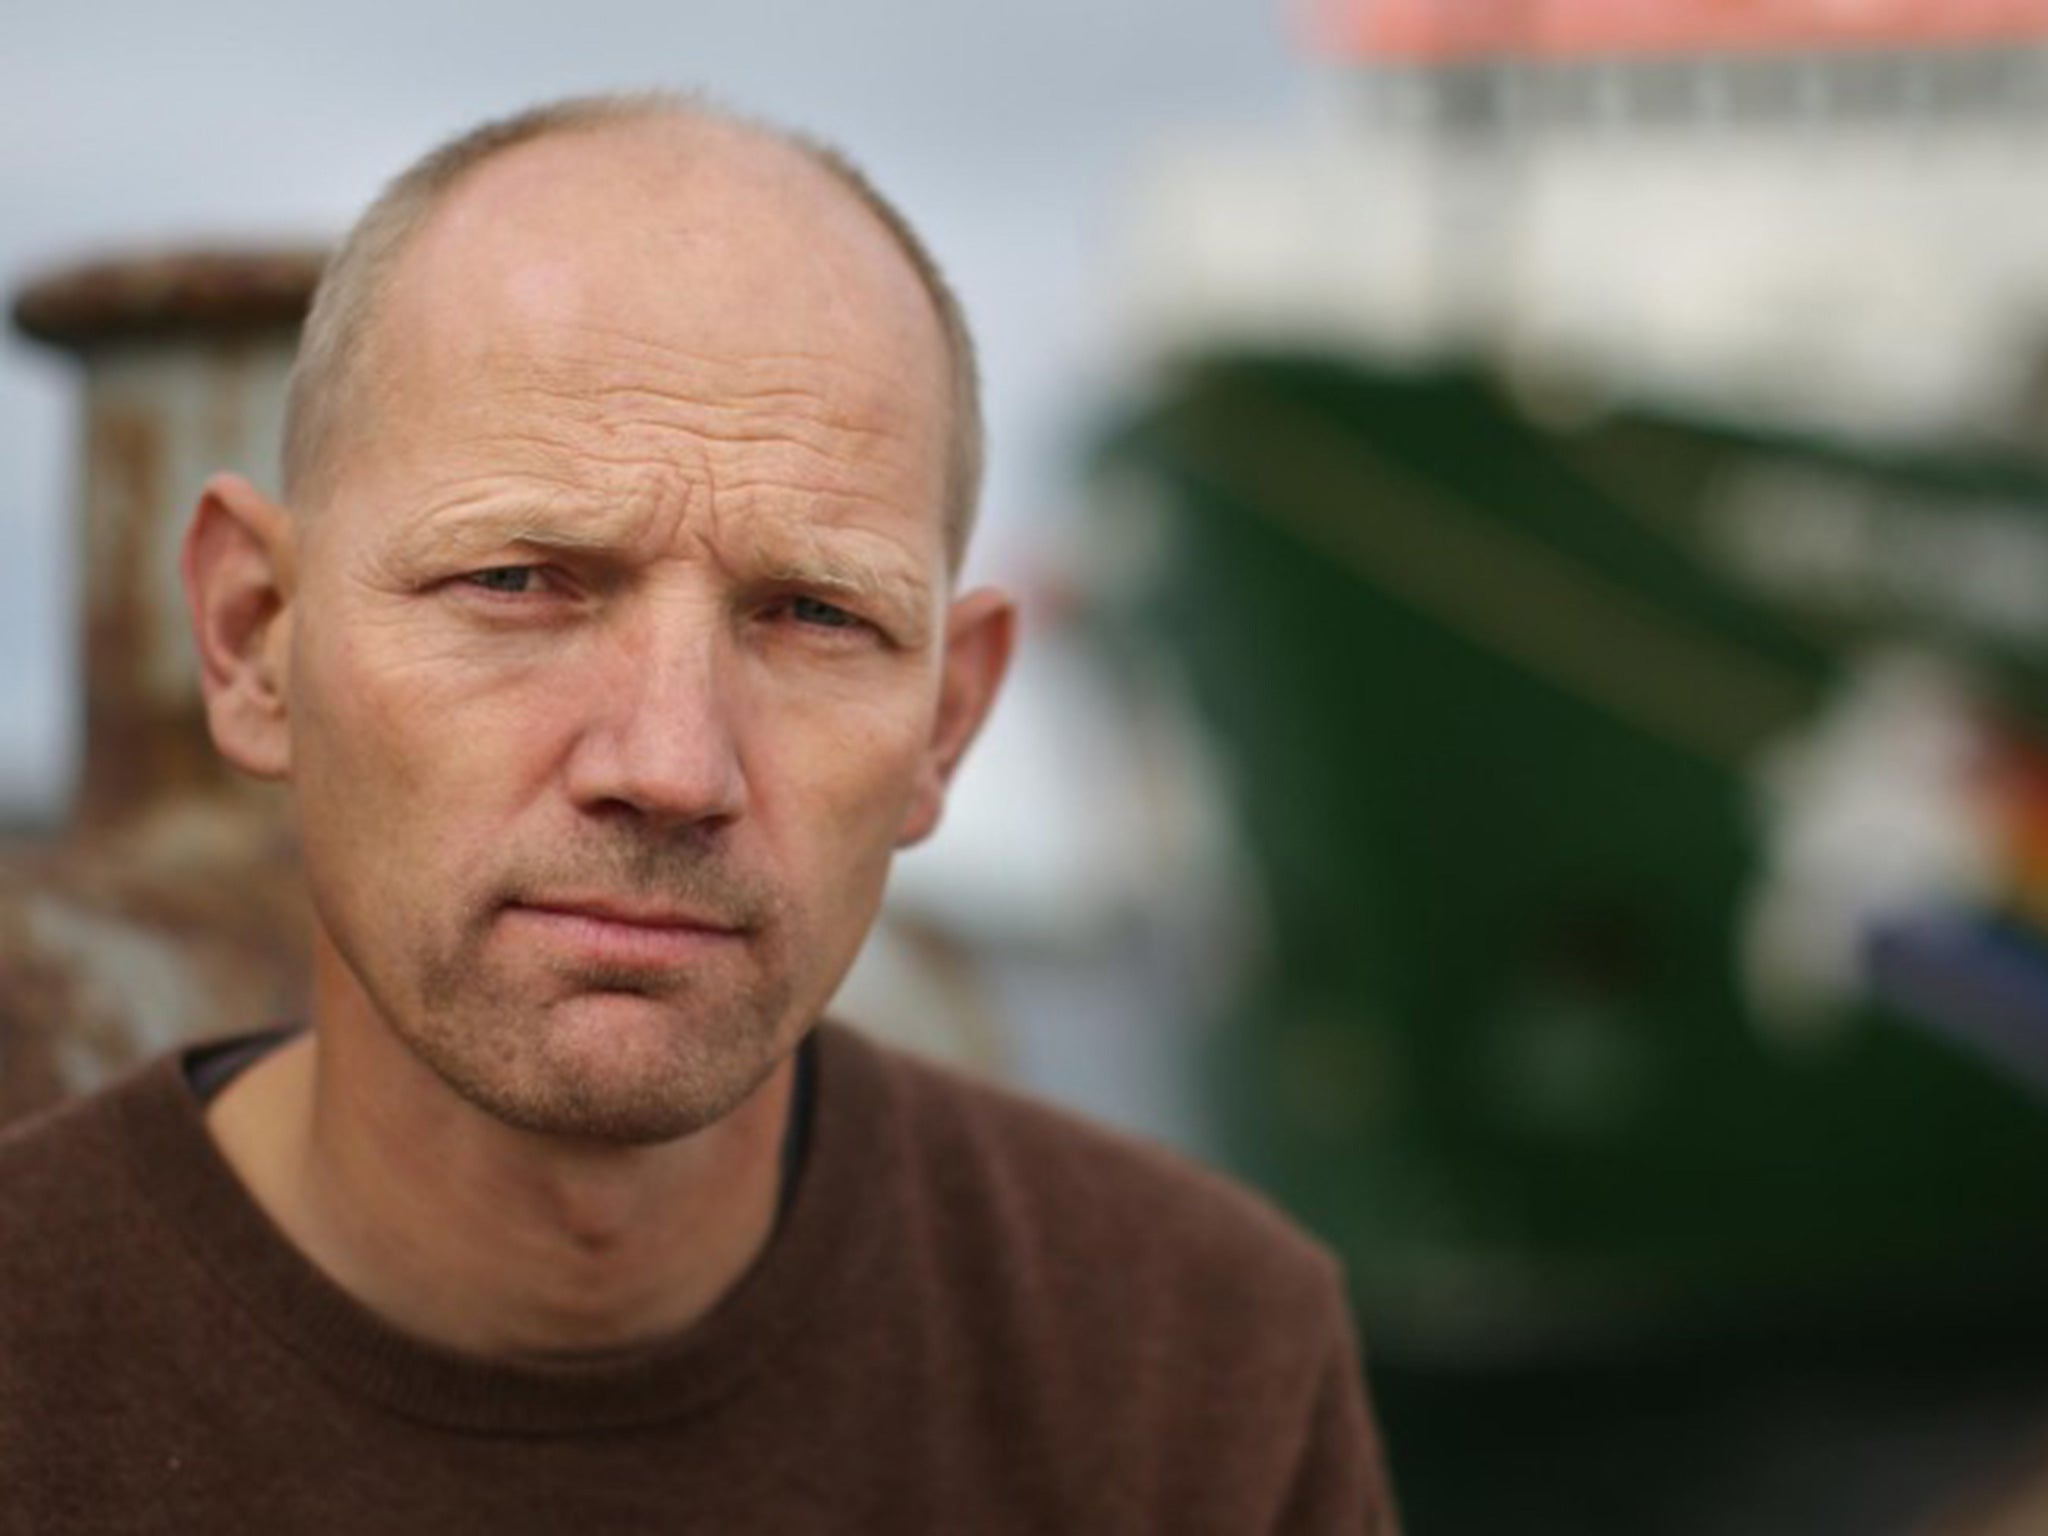 Frank Hewetson, a Greenpeace International activist who was onboad the Arctic Sunrise